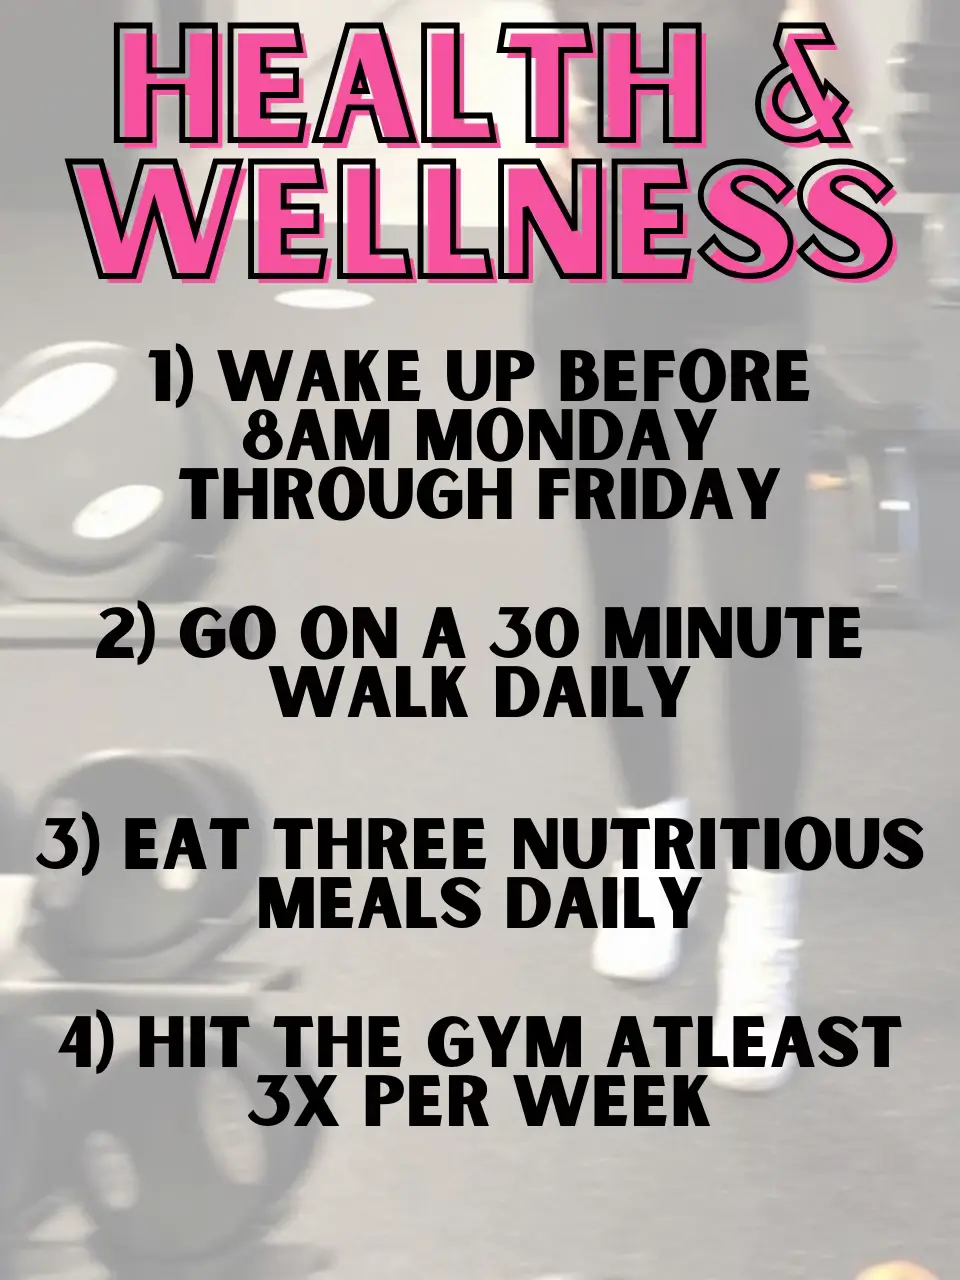  A list of health and wellness tips